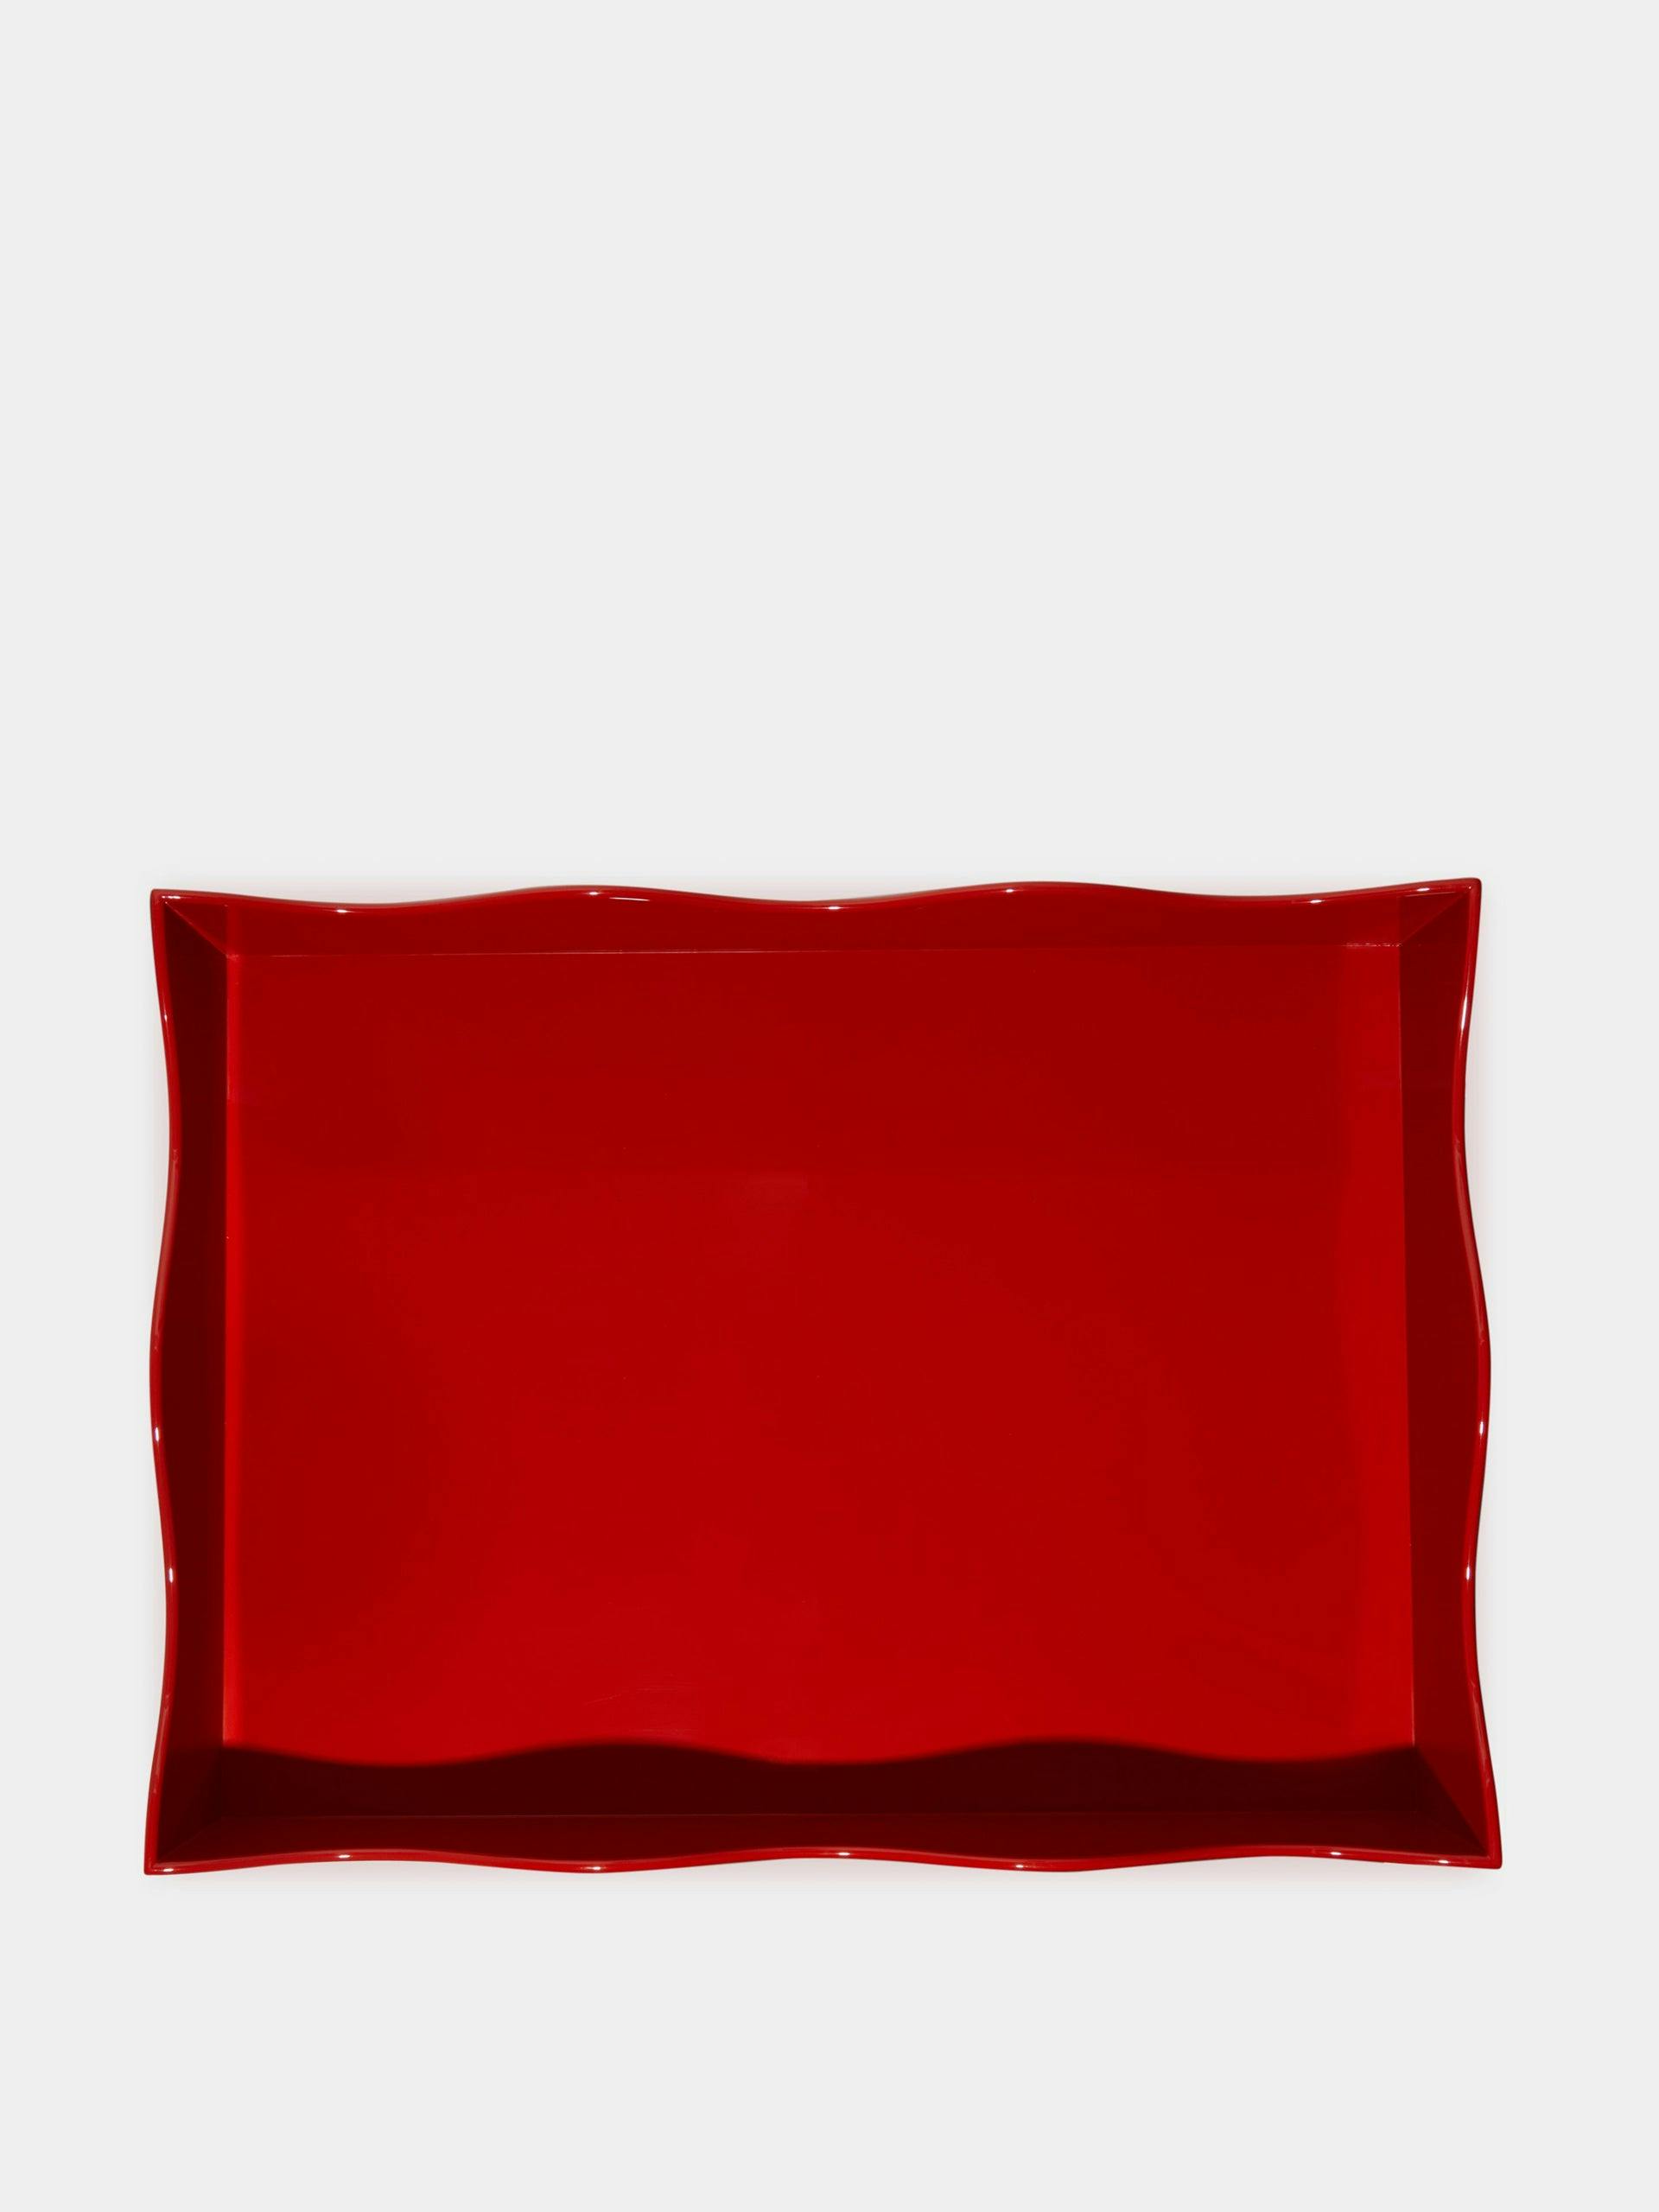 Red lacquered tray